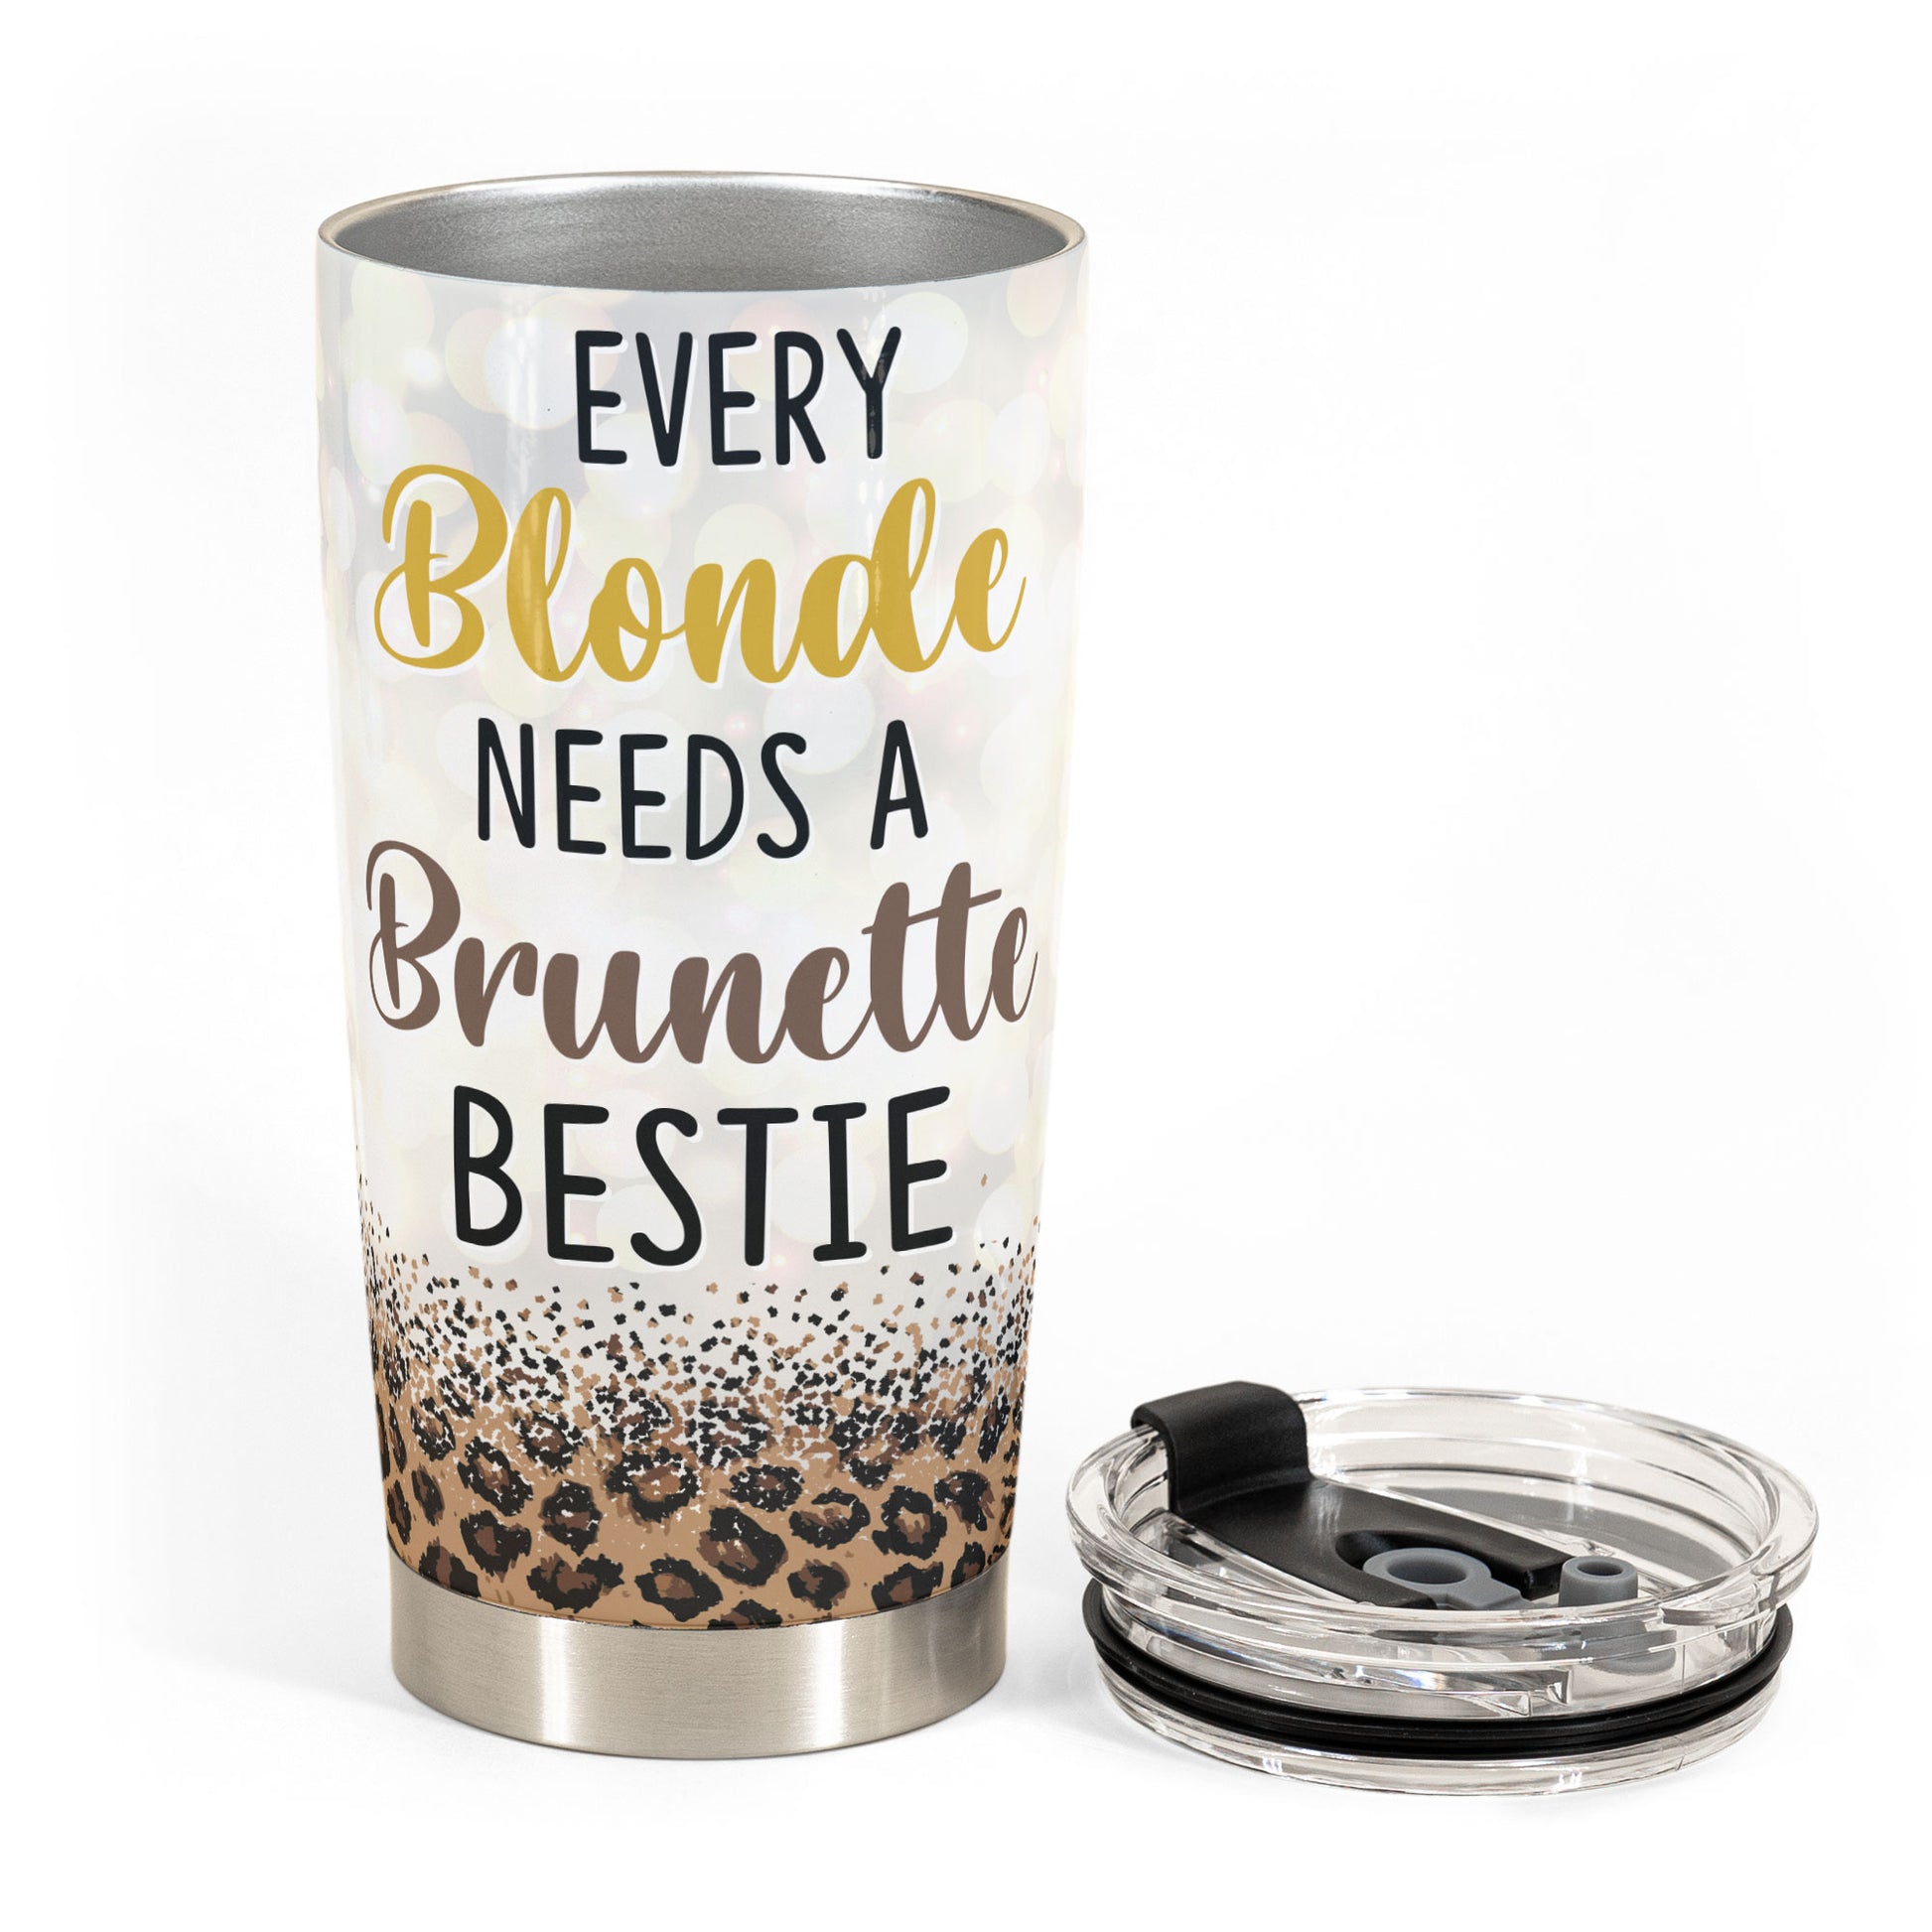 Personalized Gym Besties Water Tracker Bottle - Everyone Needs A